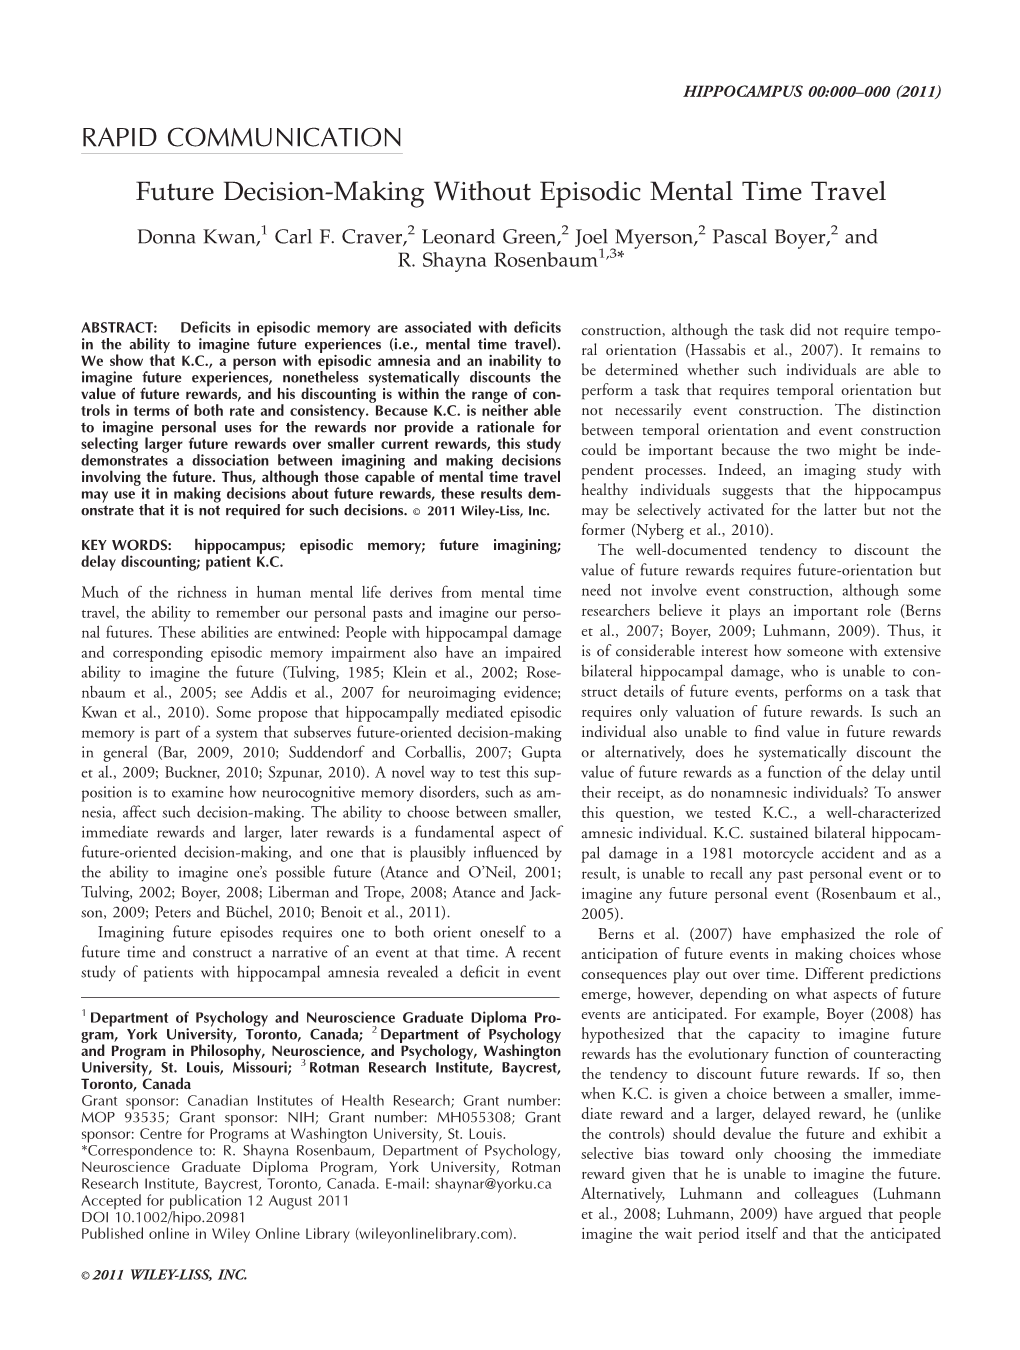 Future Decisionmaking Without Episodic Mental Time Travel